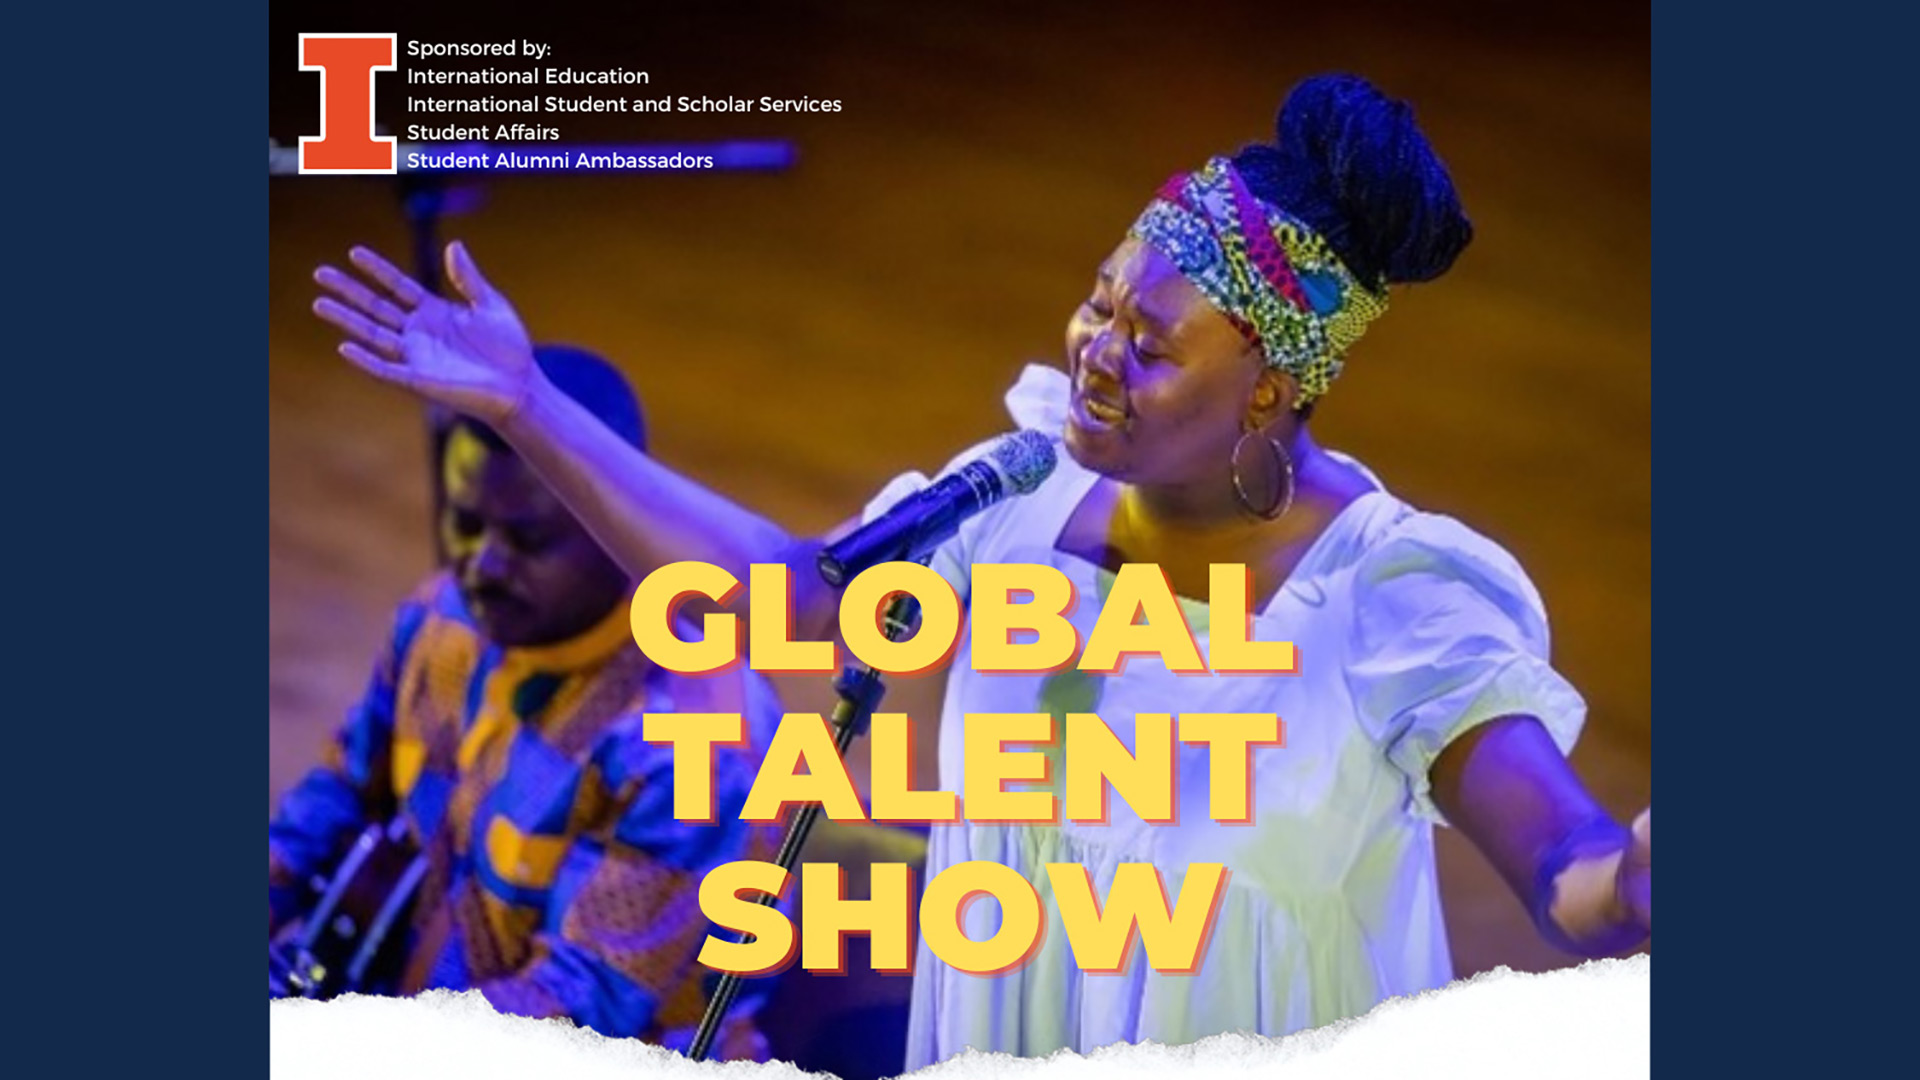 Global Talent Show banner with Black singer performing